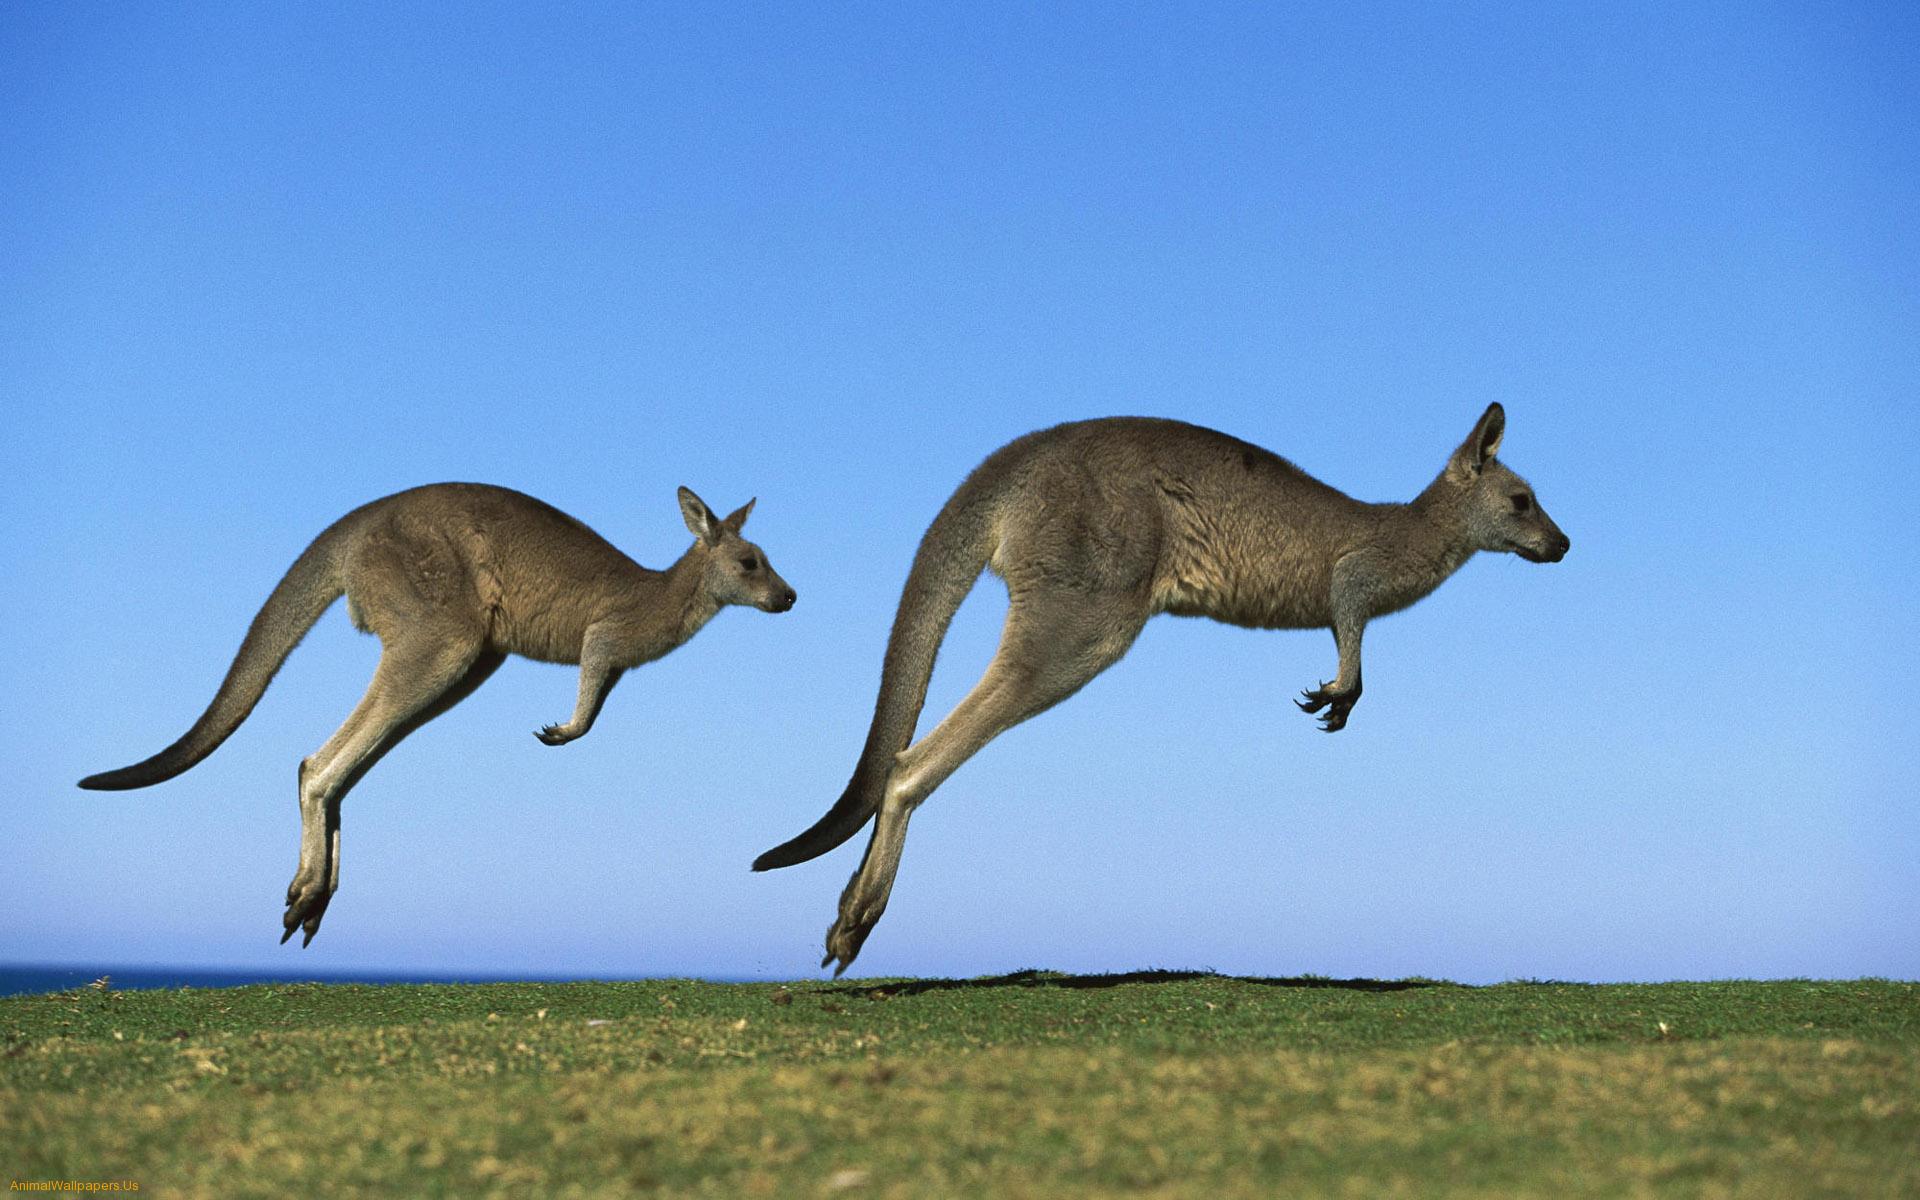 Like a kangaroo. Why are those kangaroos such efficient jumpers anyway? Could it have something to do with a massive rubberband like tendon that utlizes the ...